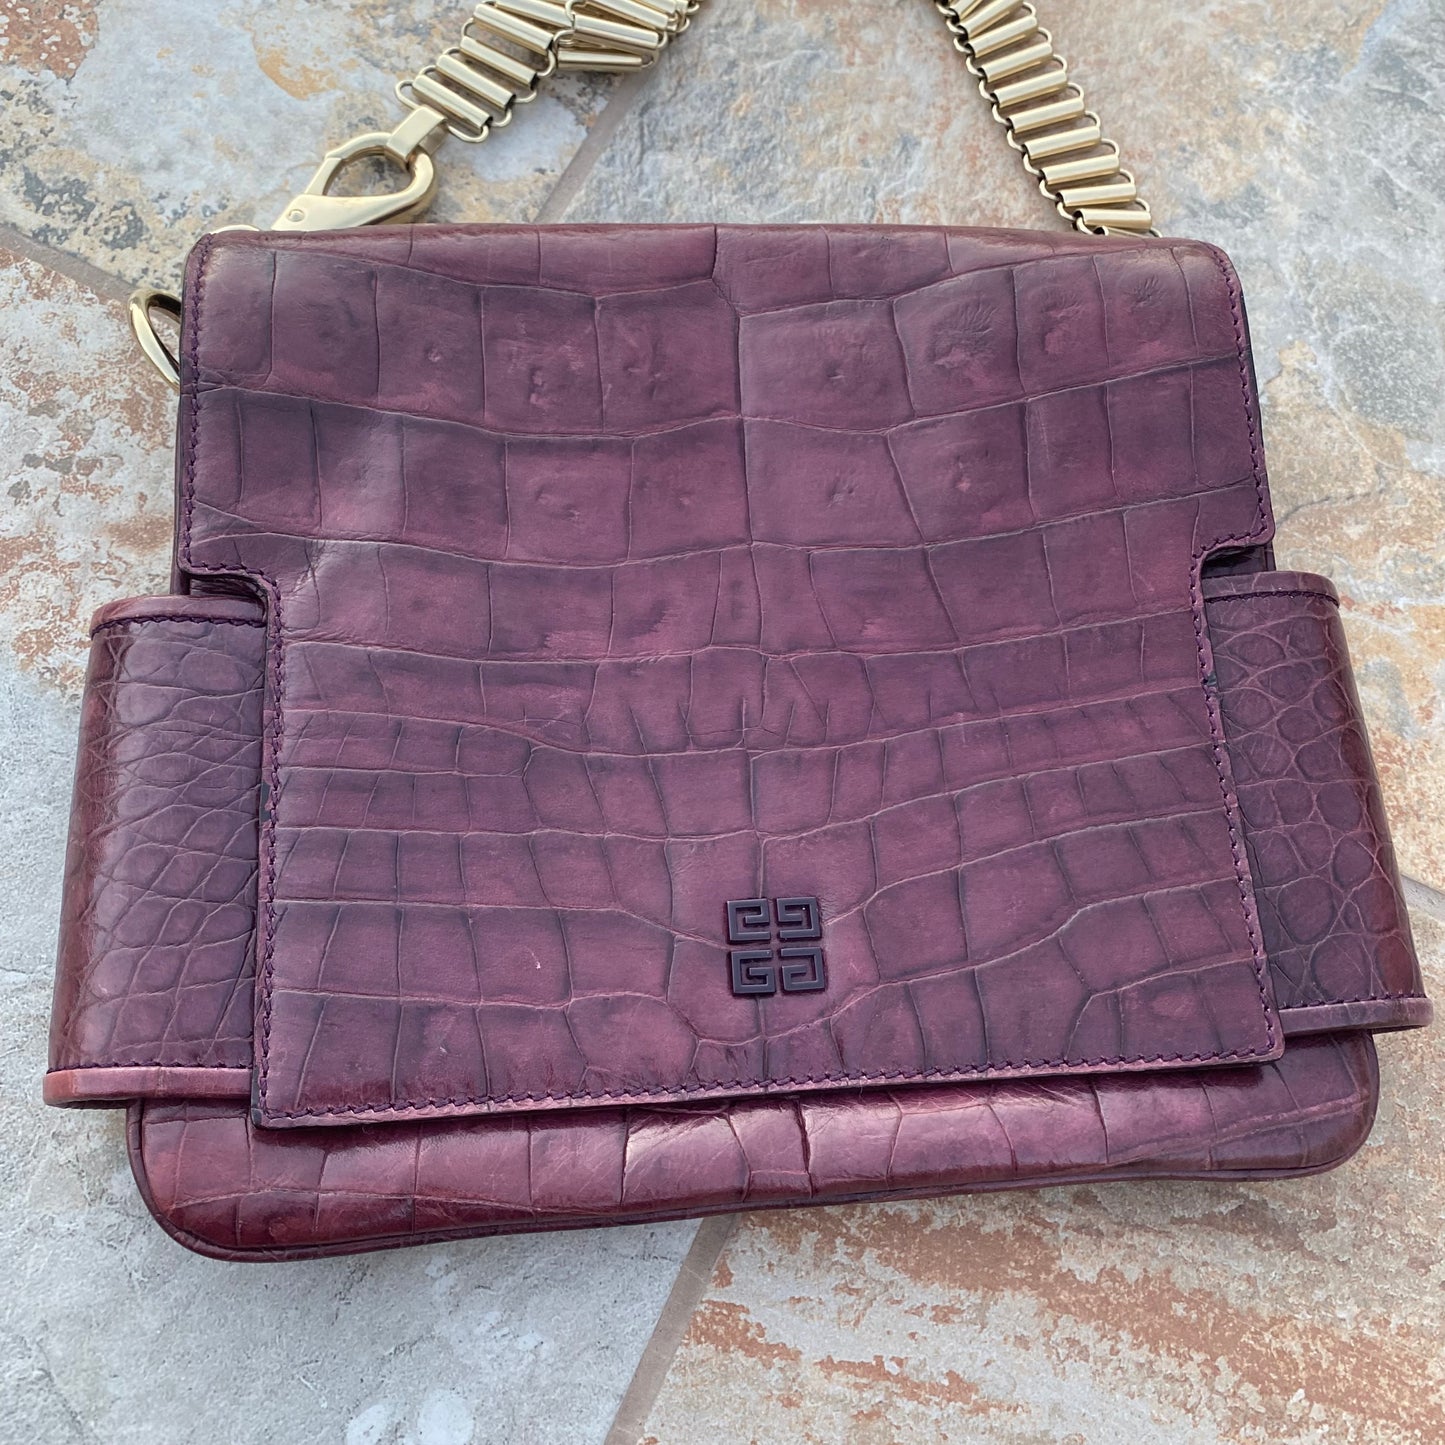 Givenchy Vintage Croc Embossed Chain Bag